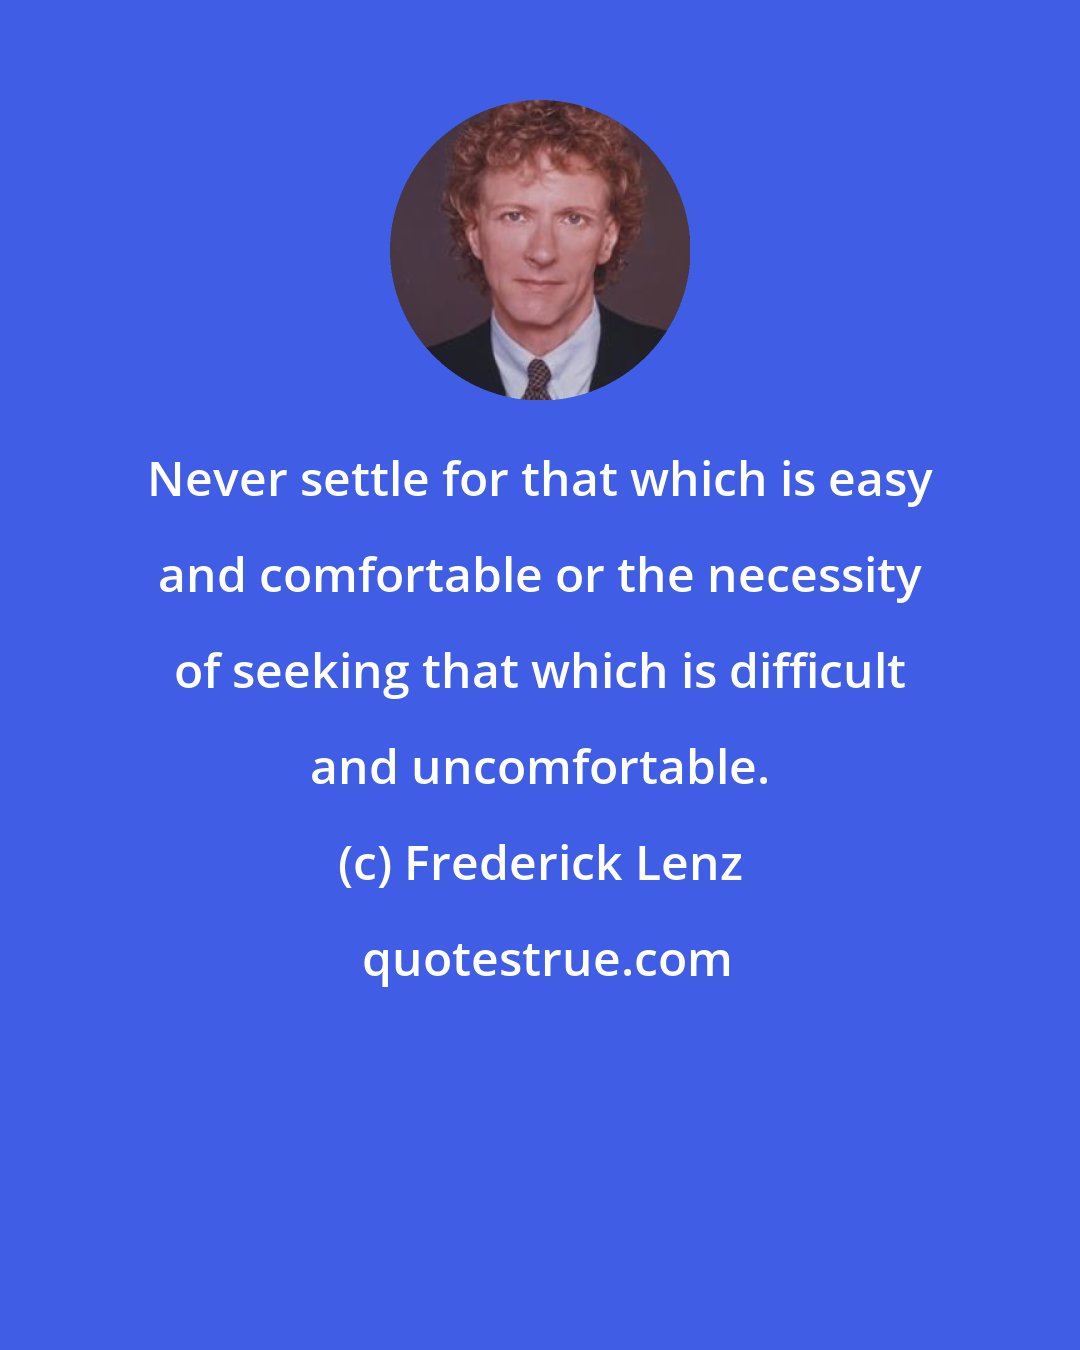 Frederick Lenz: Never settle for that which is easy and comfortable or the necessity of seeking that which is difficult and uncomfortable.